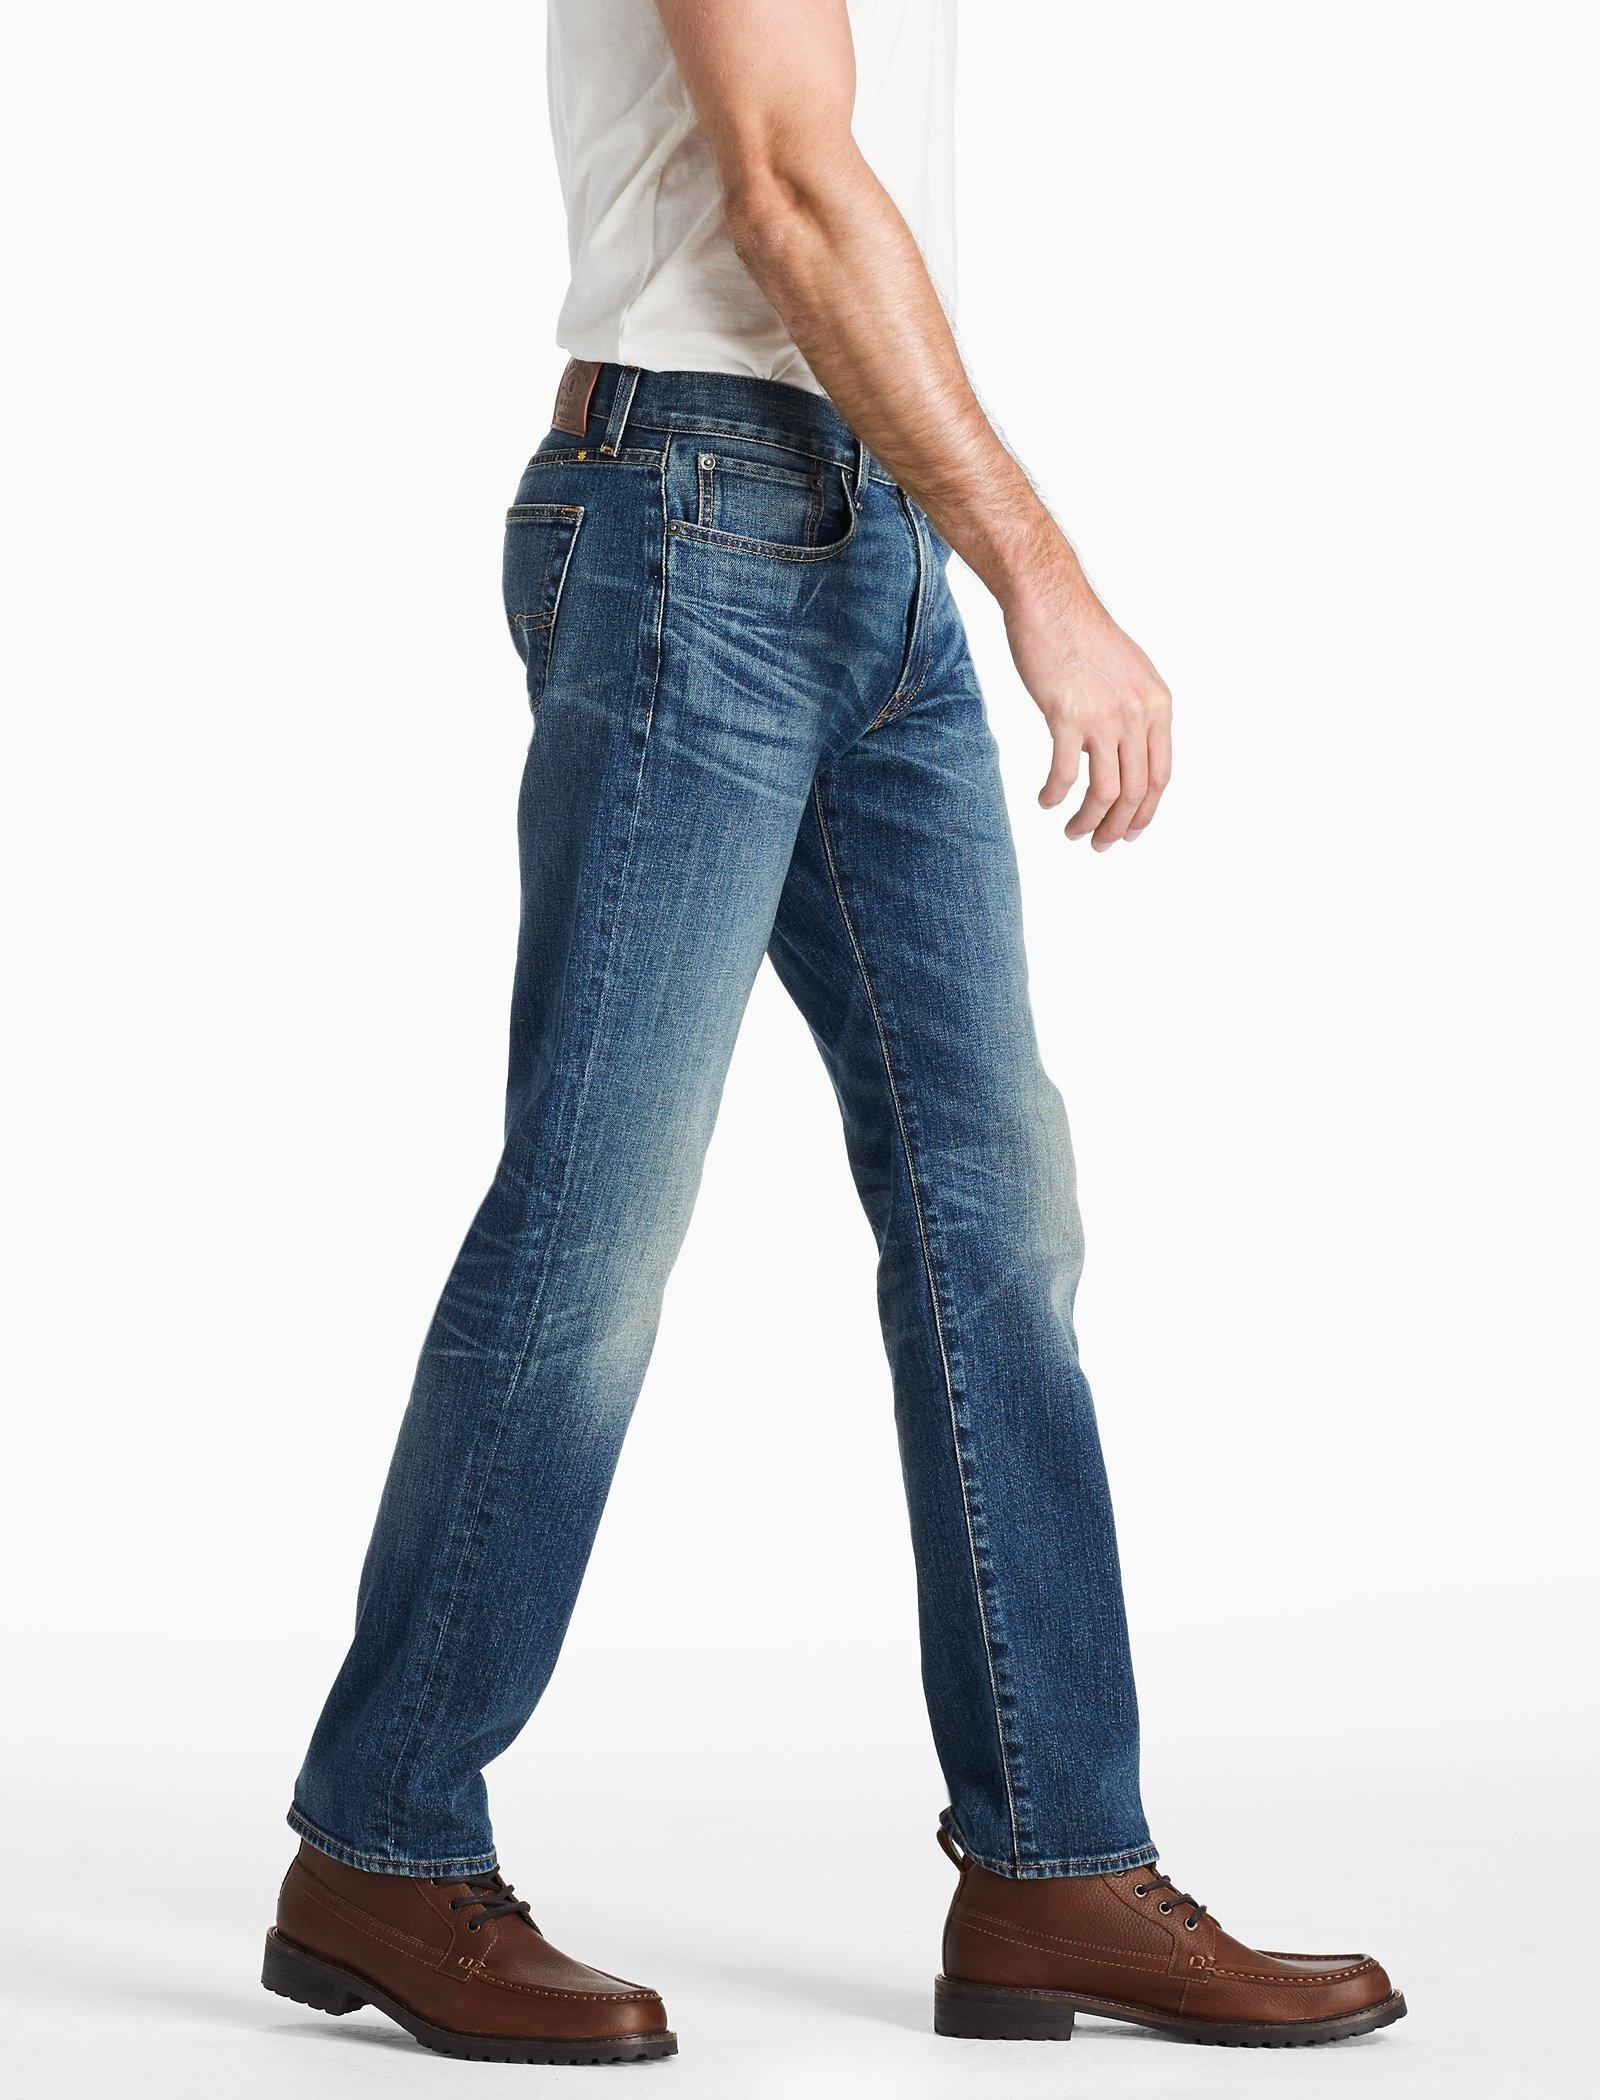 lucky 121 slim jeans